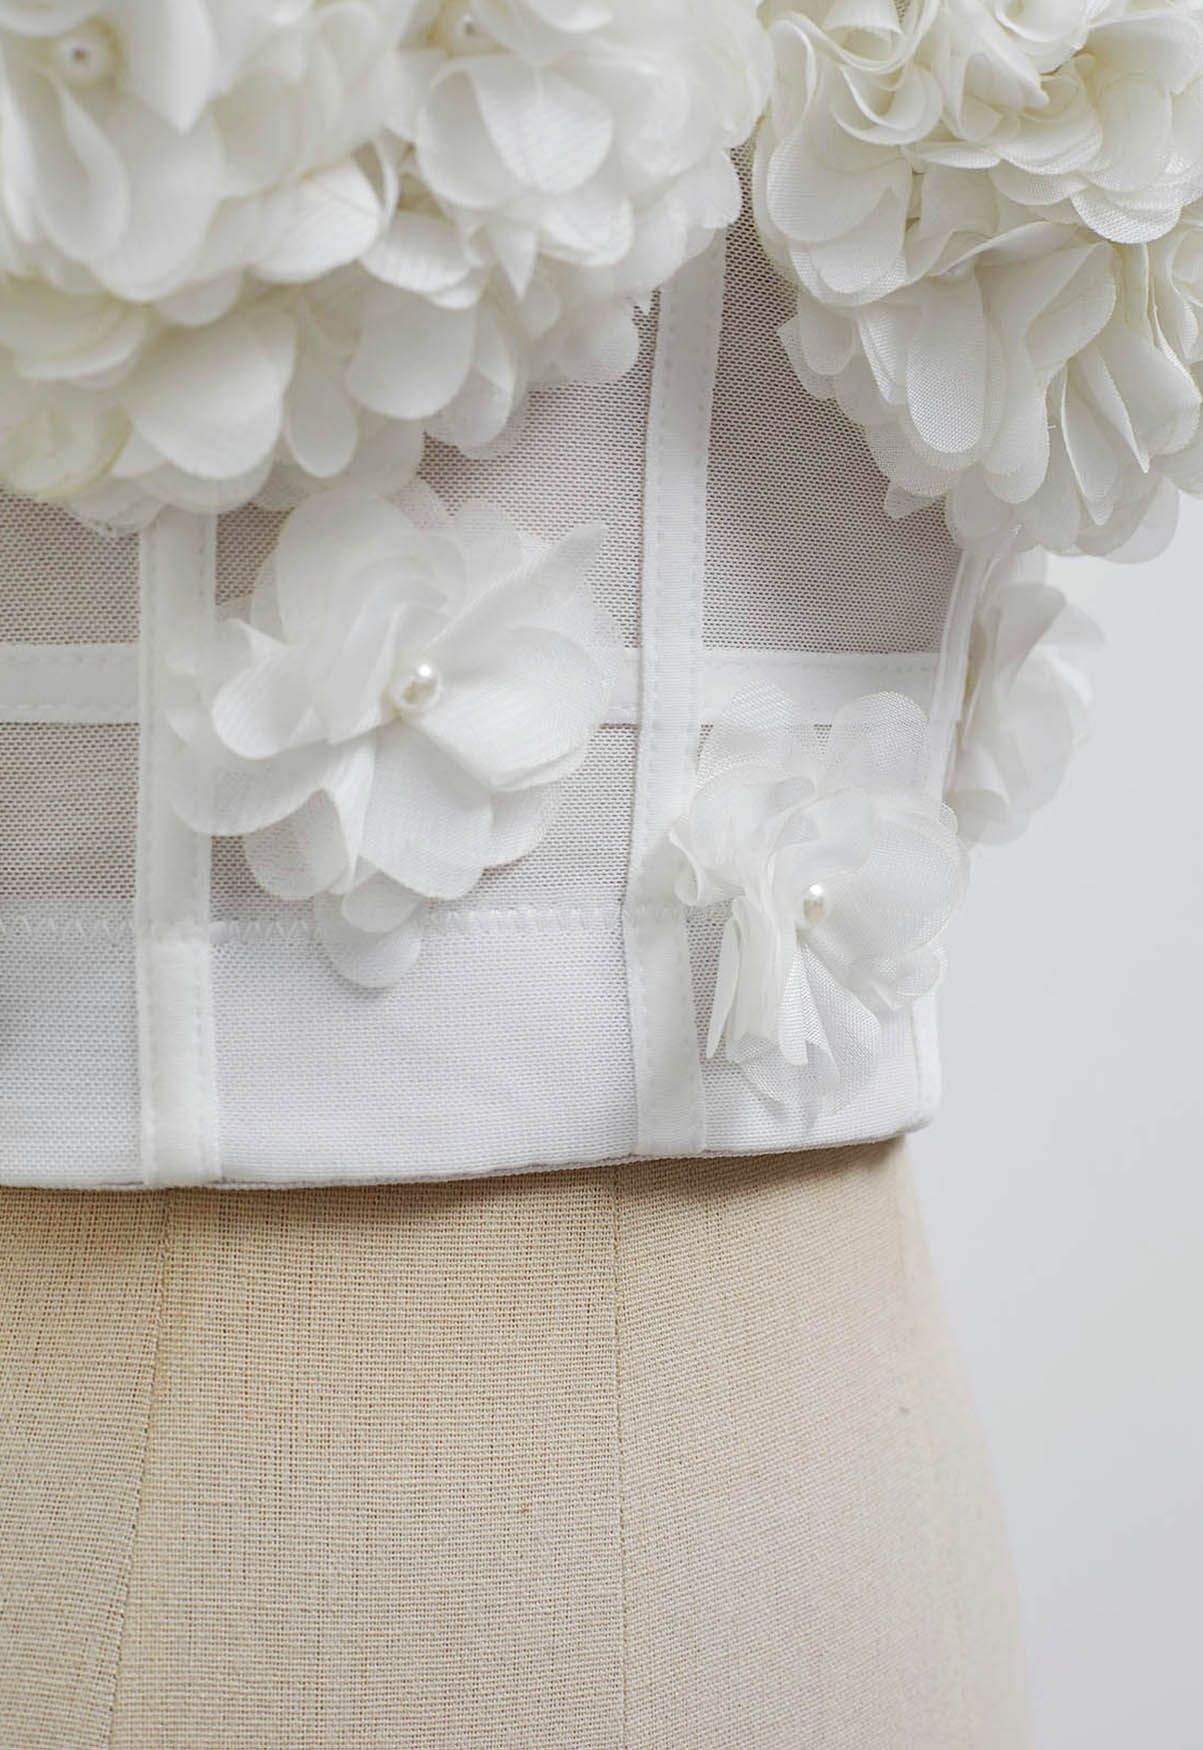 Pearly Petal Bustier Crop Top in White